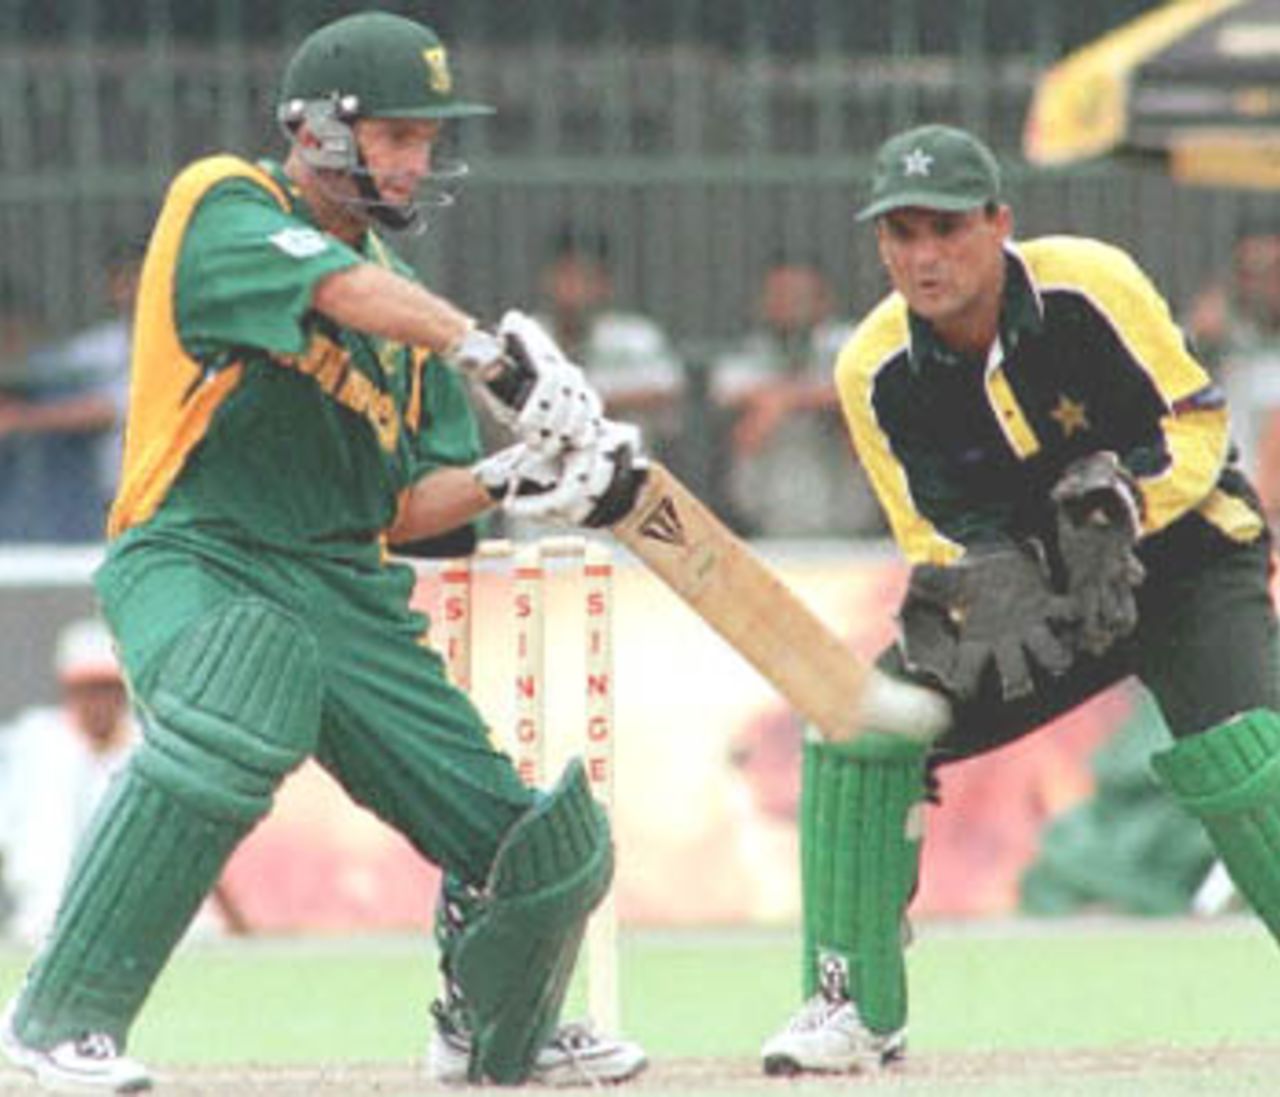 South African batsman Gary Kirsten cuts the ball in his innings of 52 in the day-night limited overs match against Pakistan in the Singer Cup triangular. Pakistan skipper Moin Khan looks on. Pakistan have been set a target of 242 to win. Singer Triangular Series, 2000, 3rd Match, Pakistan v South Africa, R.Premadasa Stadium, Khettarama, Colombo, 8 July 2000.